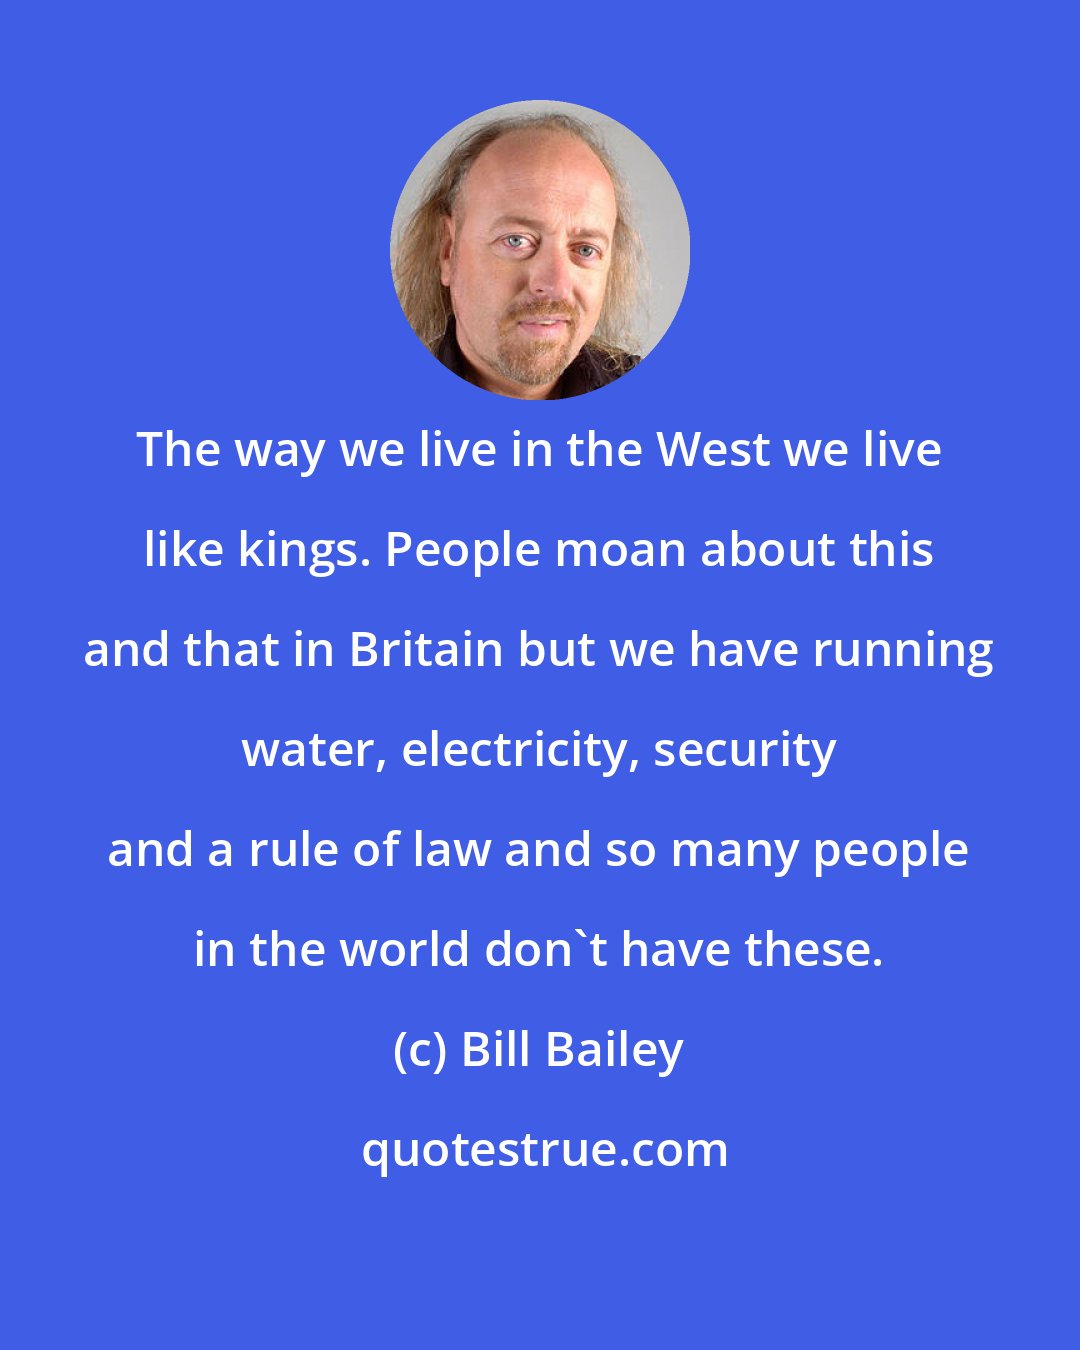 Bill Bailey: The way we live in the West we live like kings. People moan about this and that in Britain but we have running water, electricity, security and a rule of law and so many people in the world don't have these.